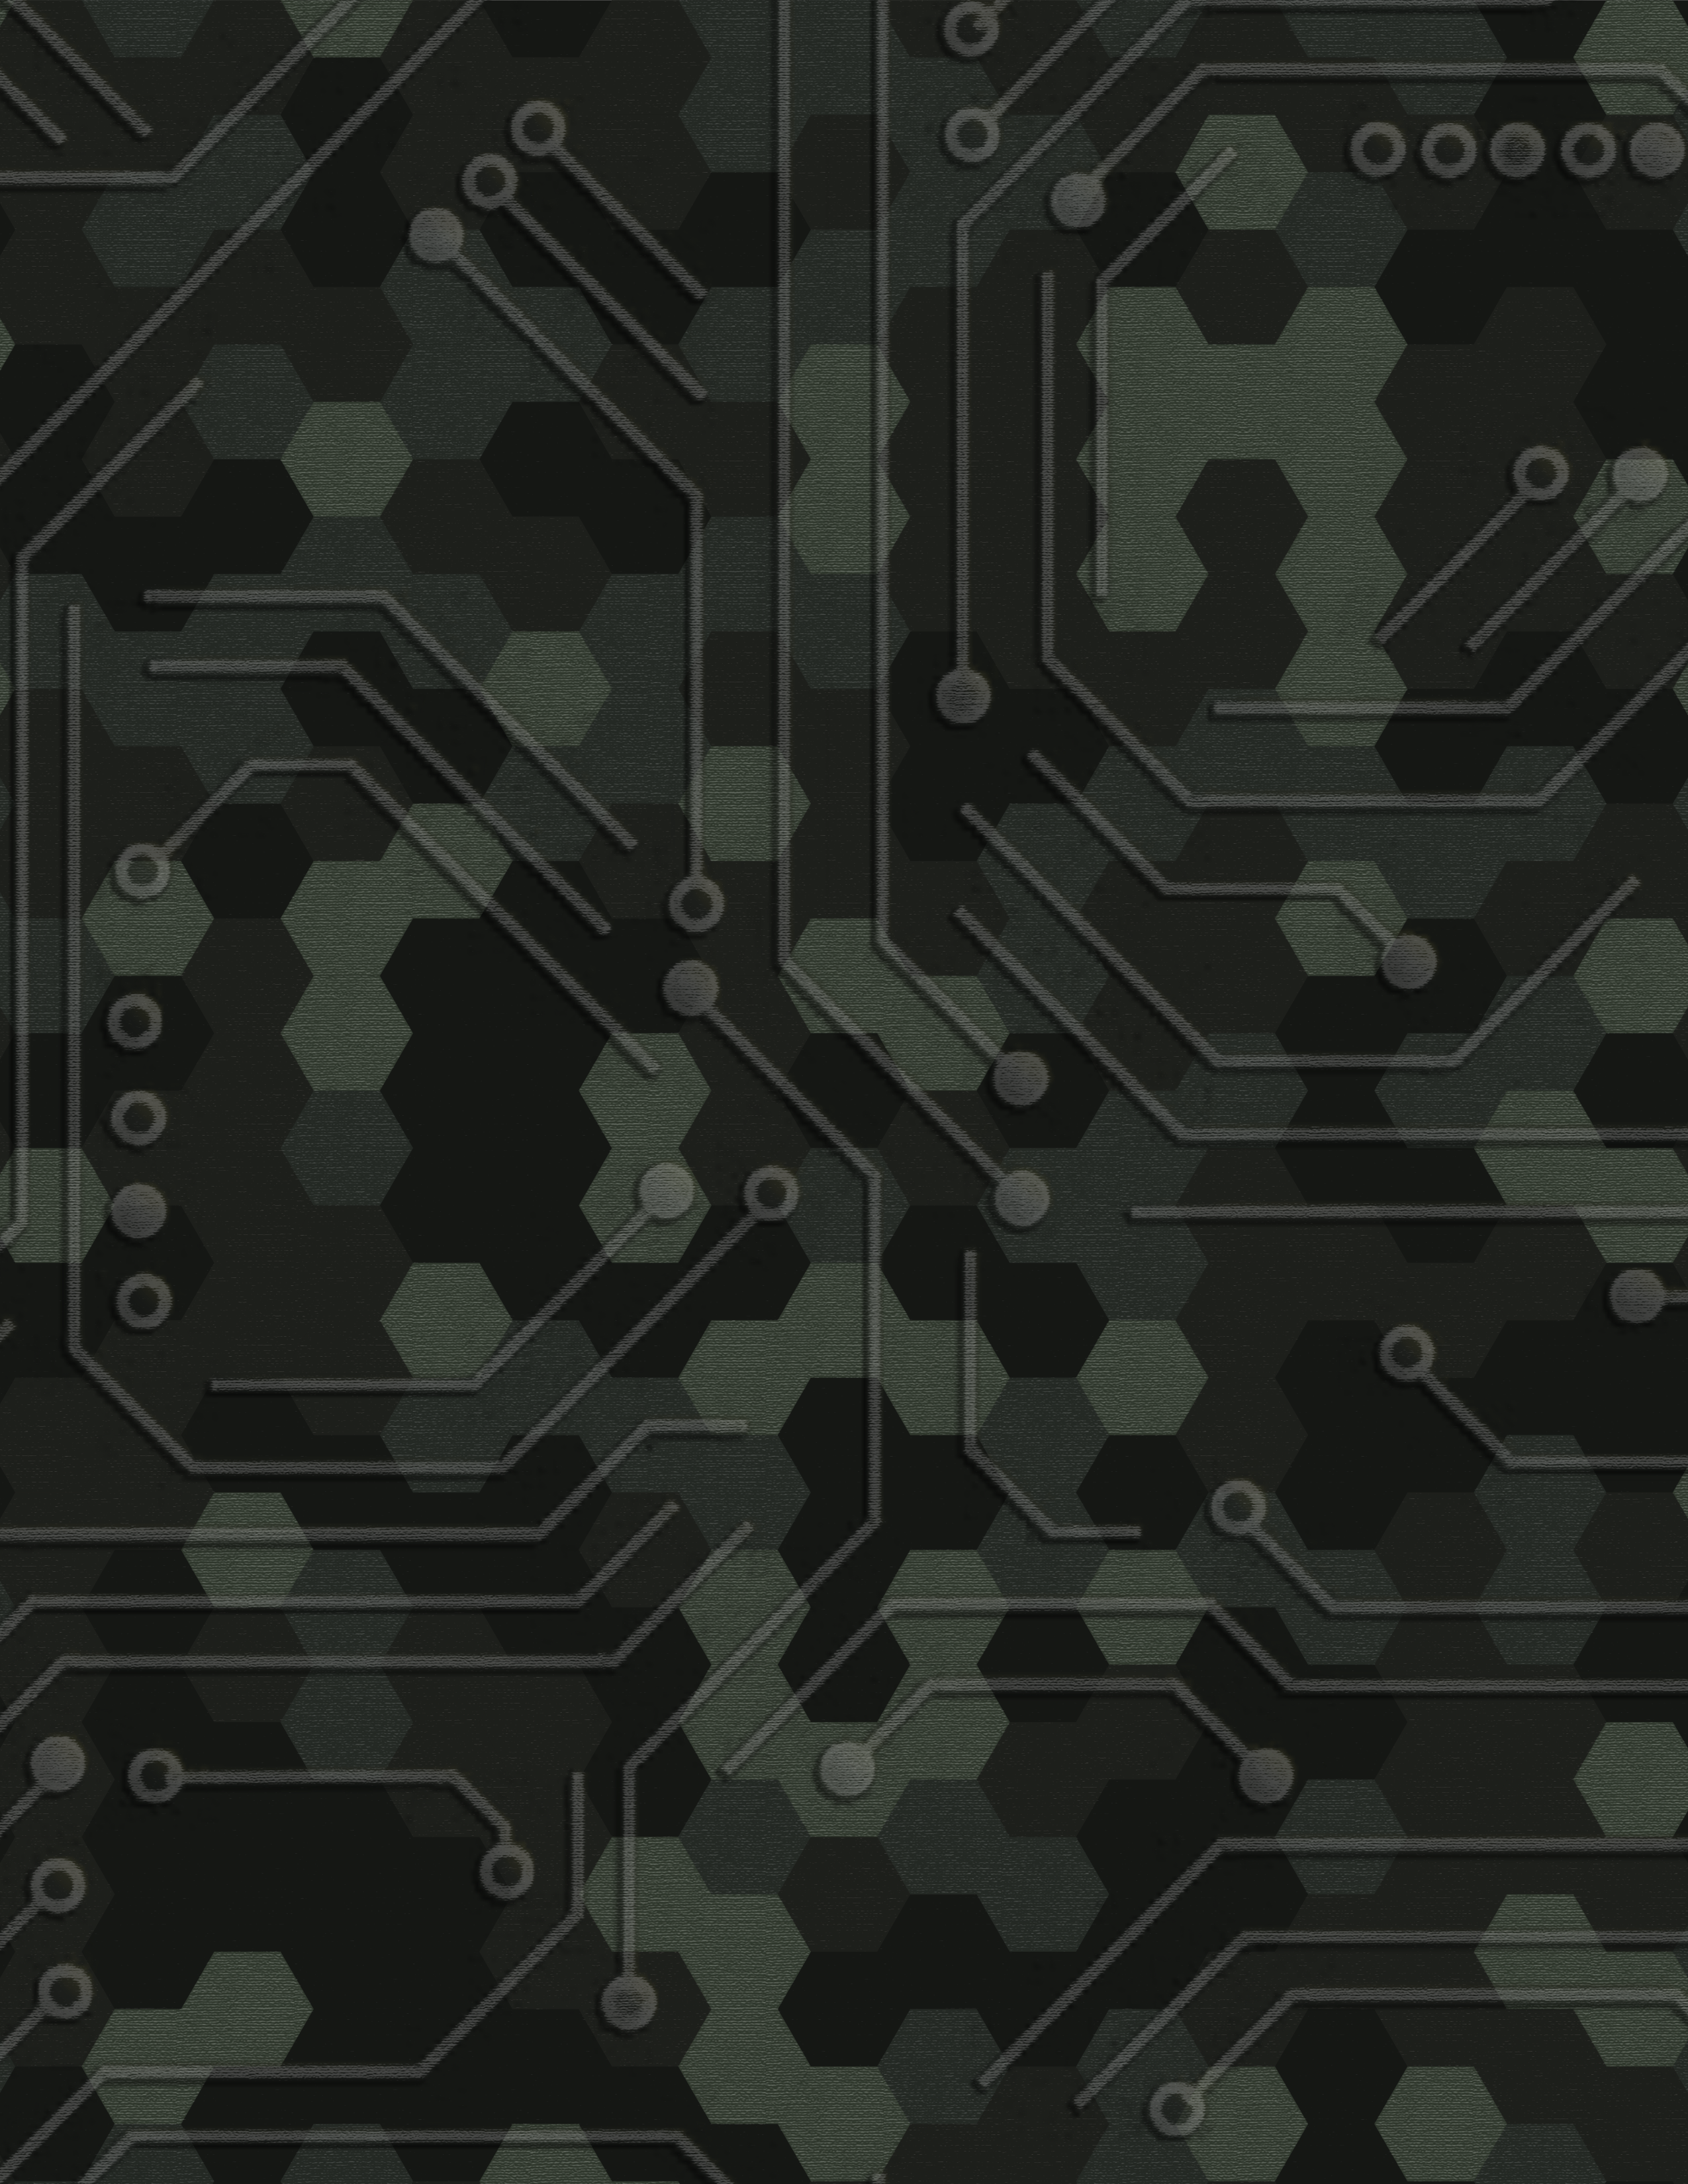 A close-up image of a dark green and black circuit board with a hexagonal pattern, representing AI and military.